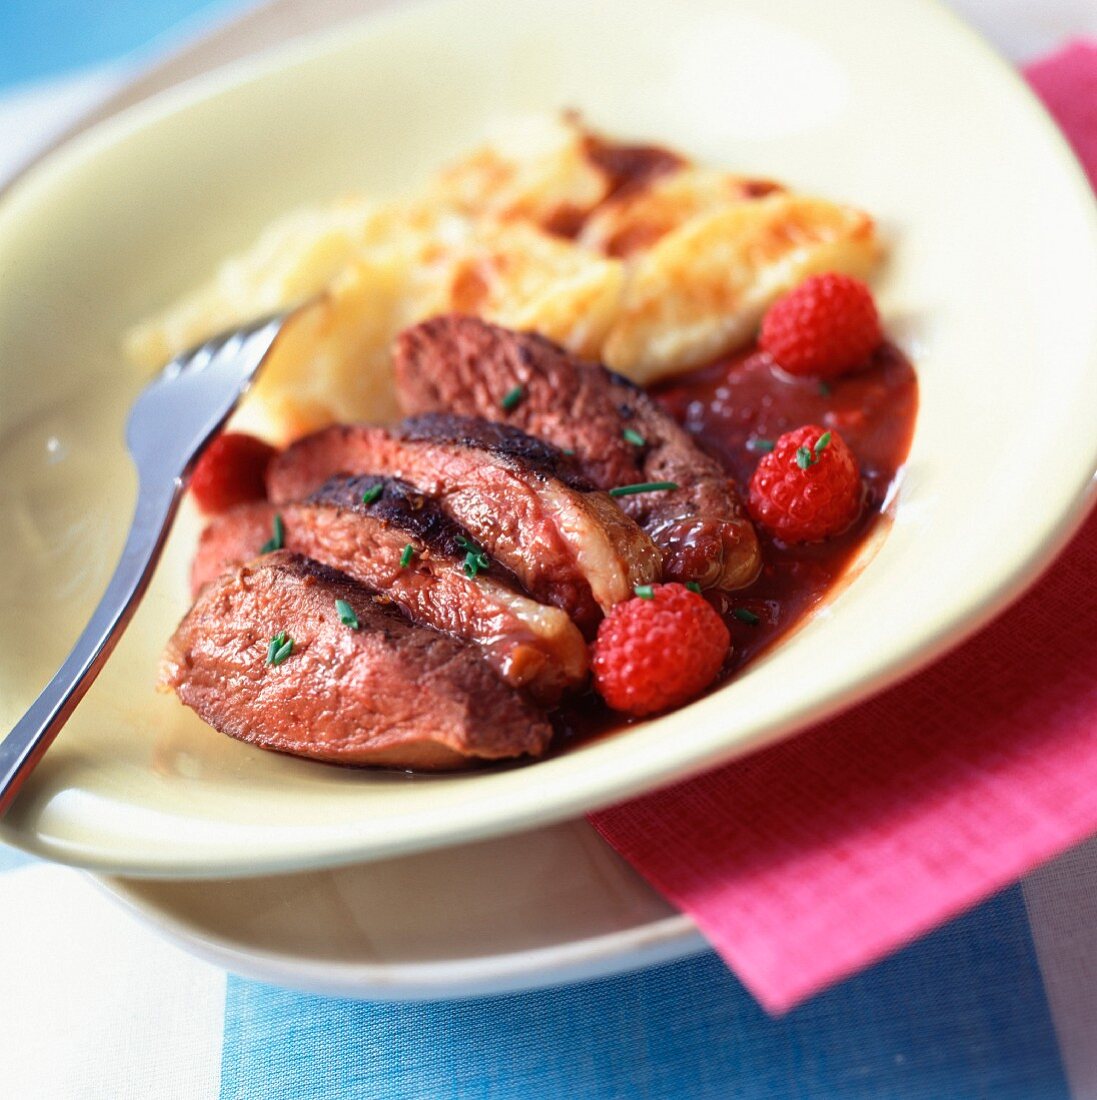 Fillets of duck breast with raspberries